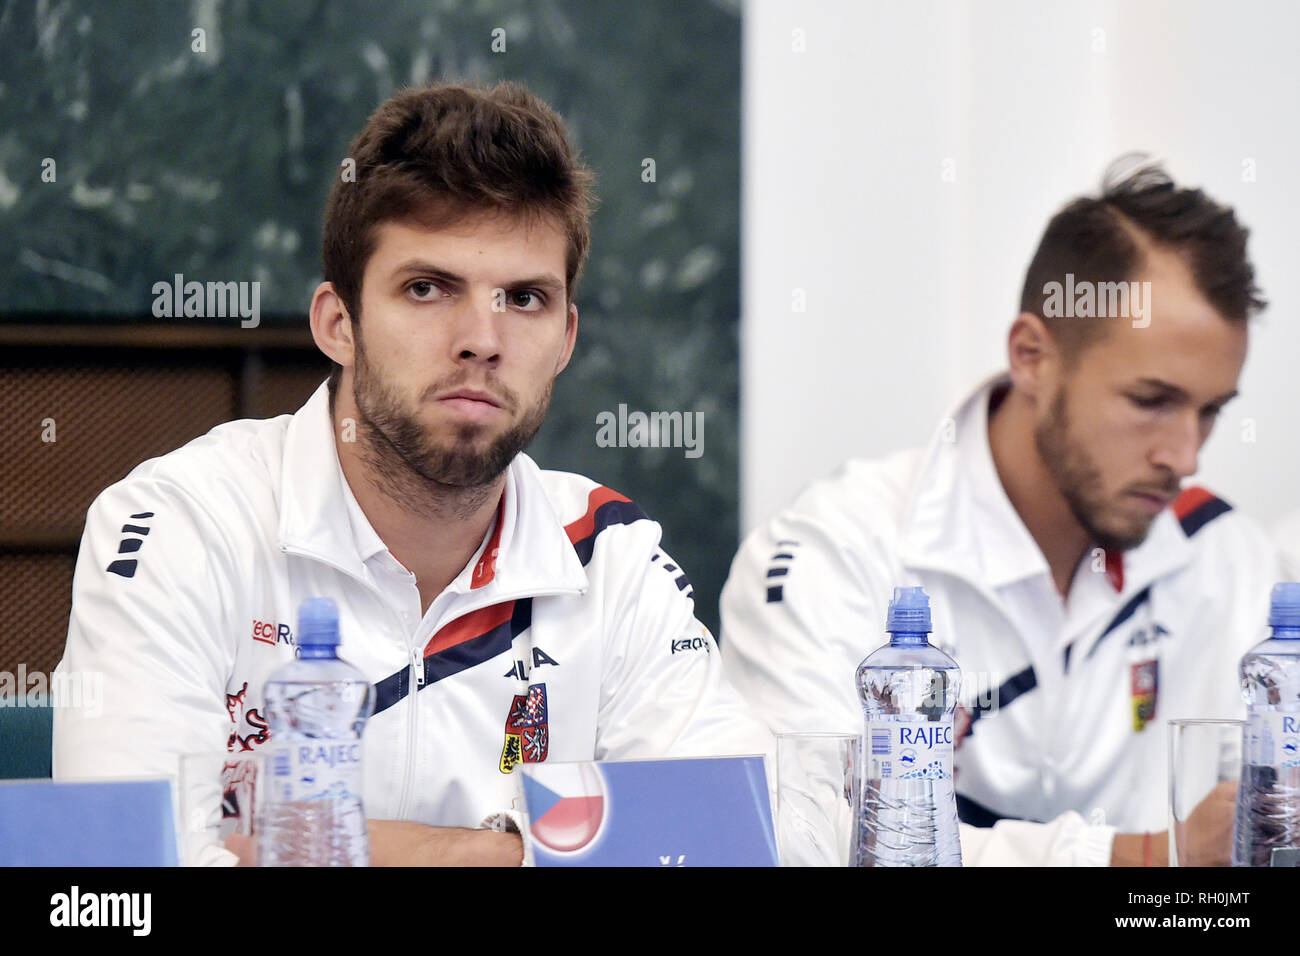 Ostrava, Czech Republic. 31st Jan, 2019. L-R Czech tennis players Jiri Vesely and Lukas Rosol attend drawing lots to decide on games of Davis Cup tennis tournament qualification between the Czech Republic and the Netherlands, on January 31, 2019, in Ostrava, Czech Republic. The qualification starts on February 1. Credit: Jaroslav Ozana/CTK Photo/Alamy Live News Stock Photo